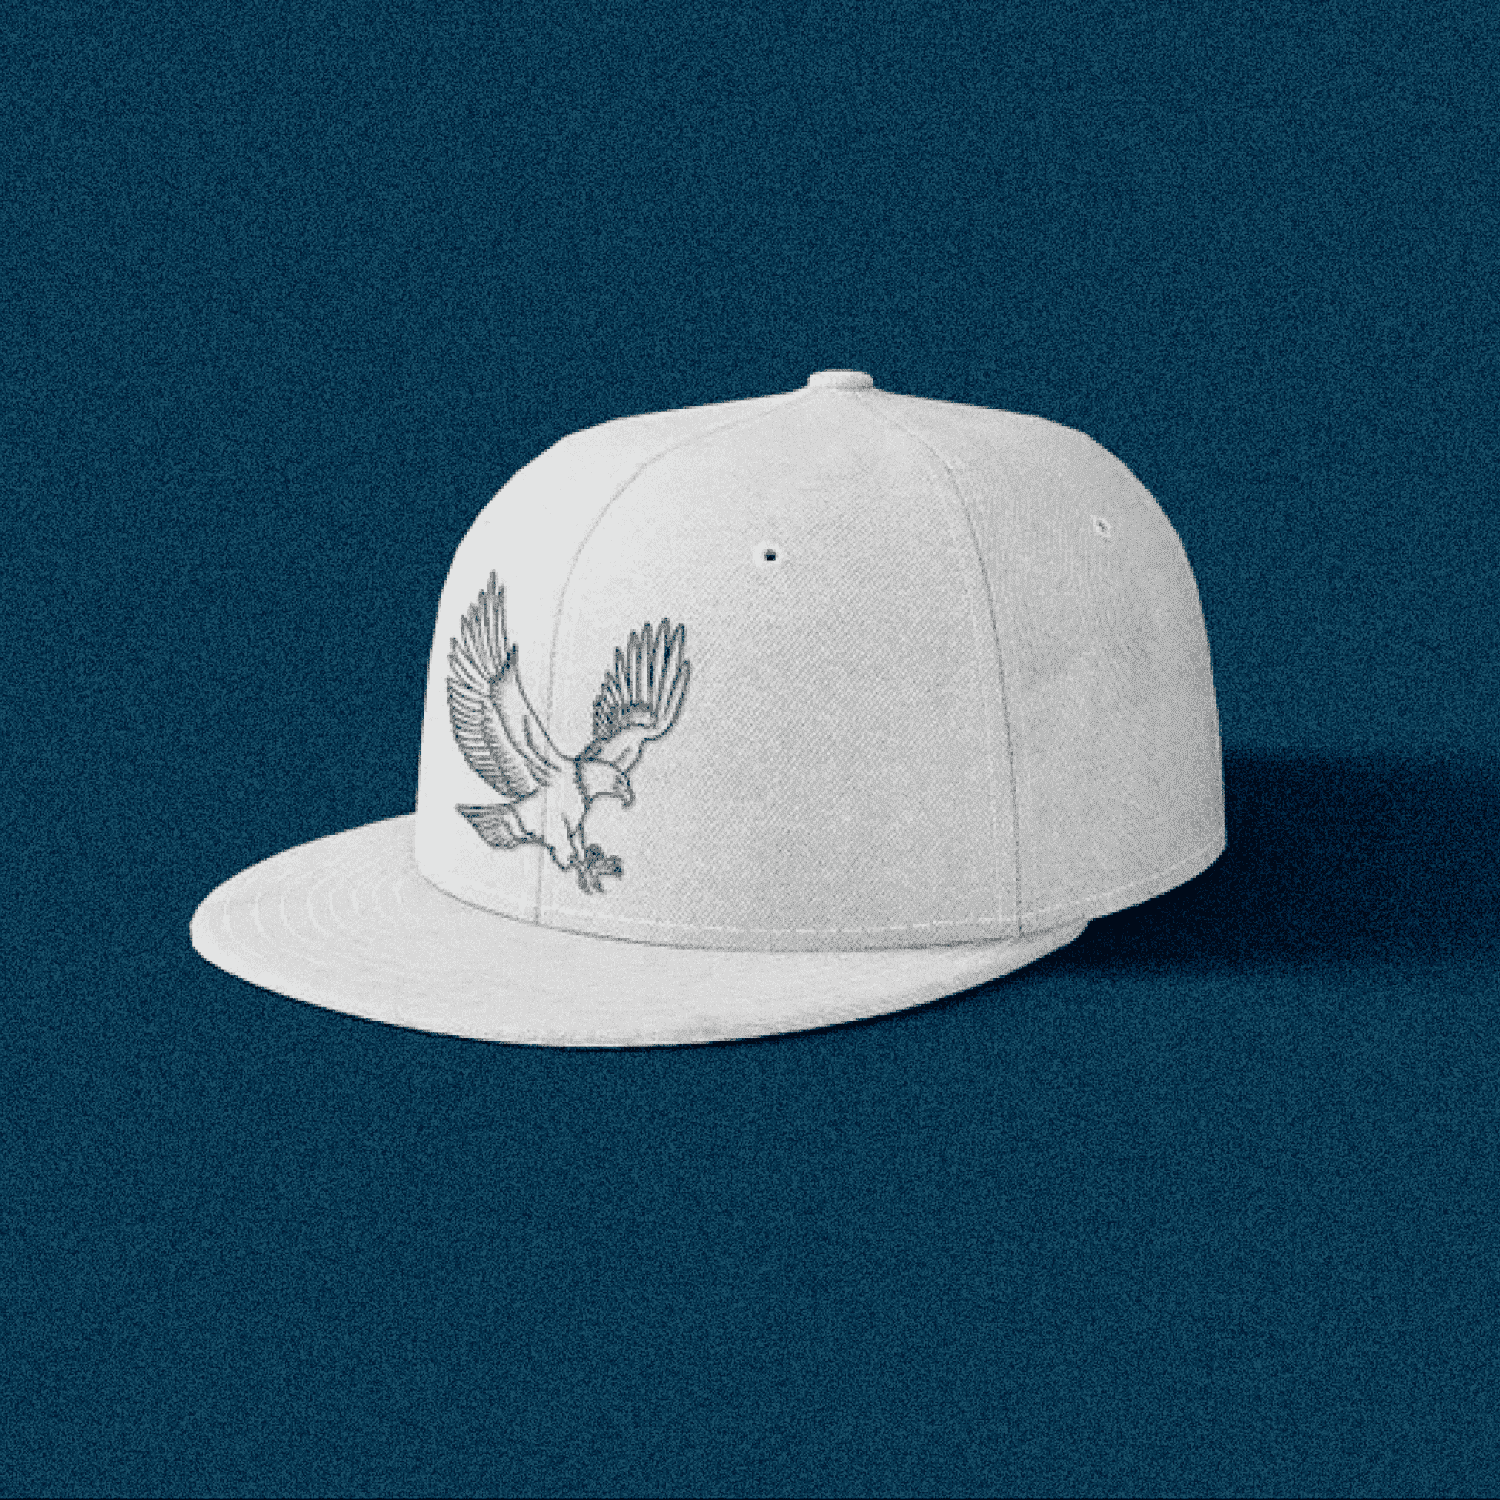 White hat with a bird embroidered on it.